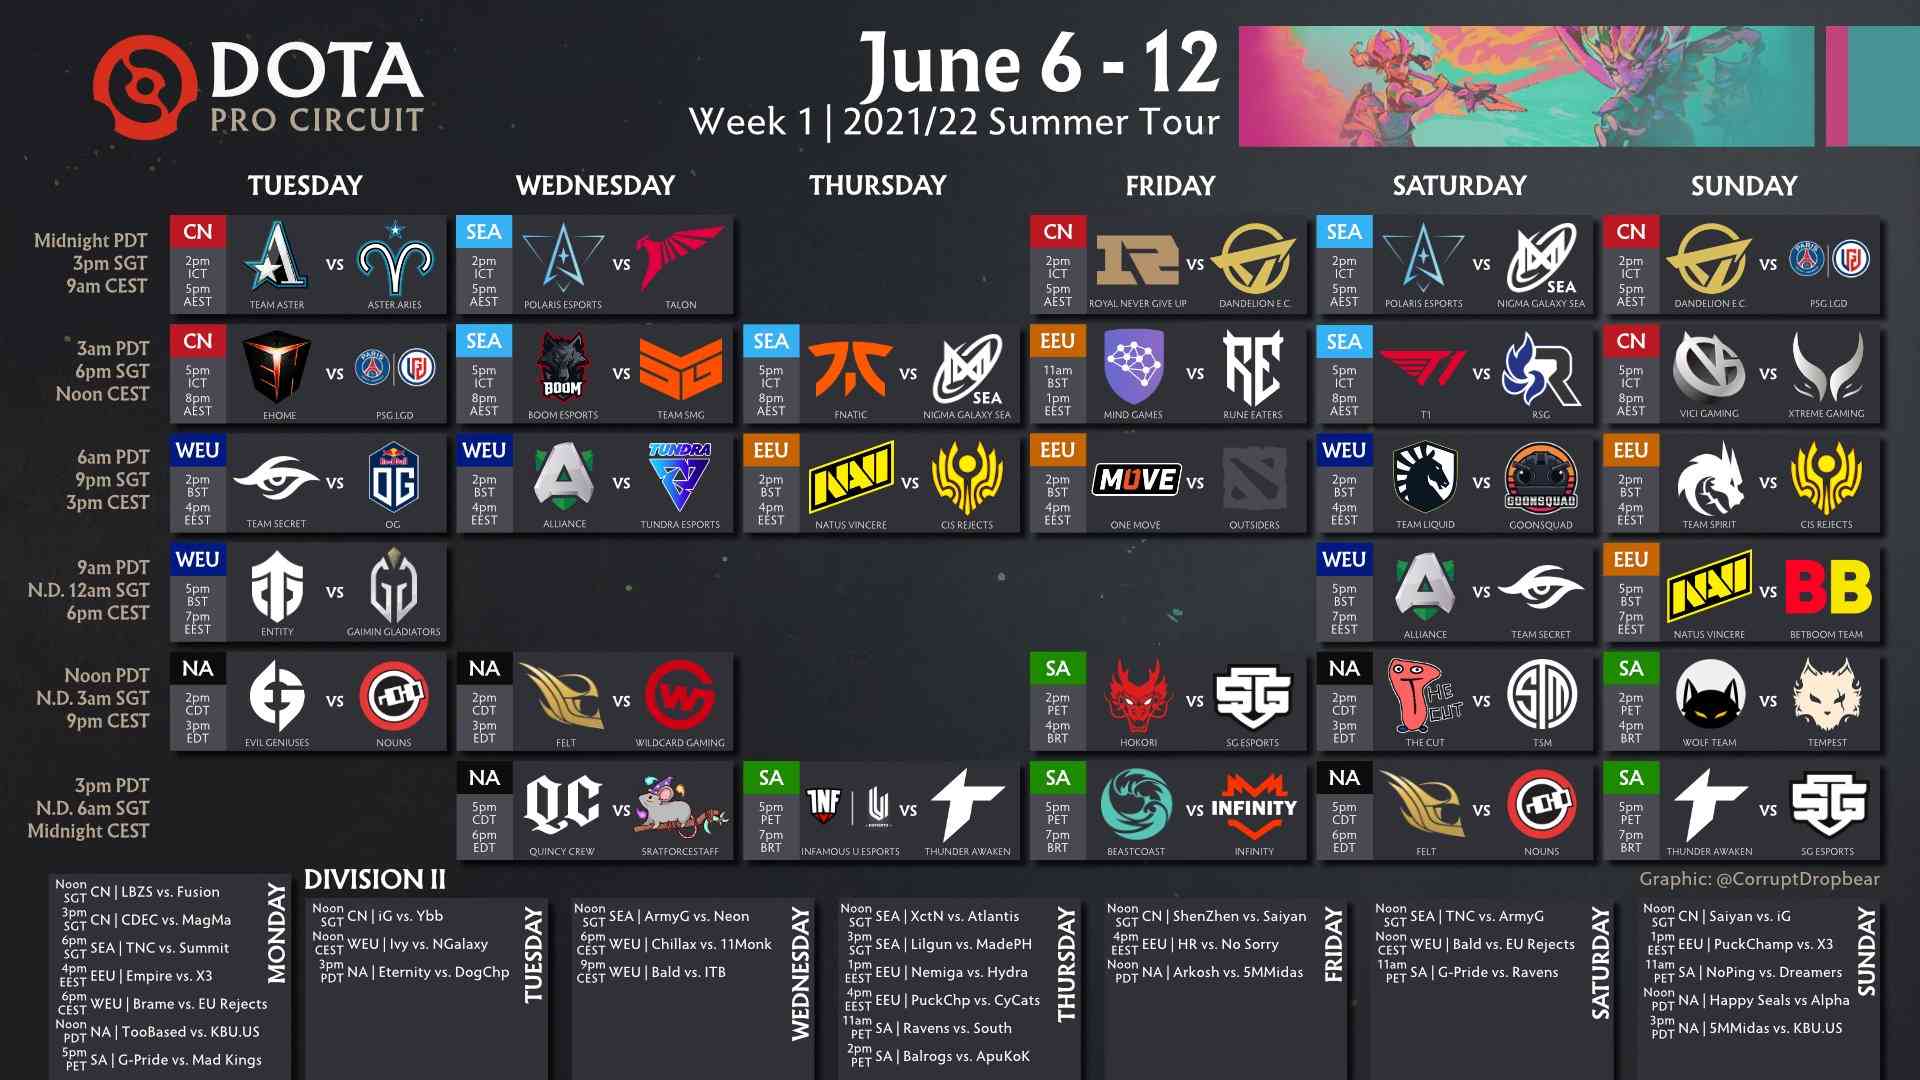 The full schedule for Week 1 of the Dota Pro Circuit's Summer Tour